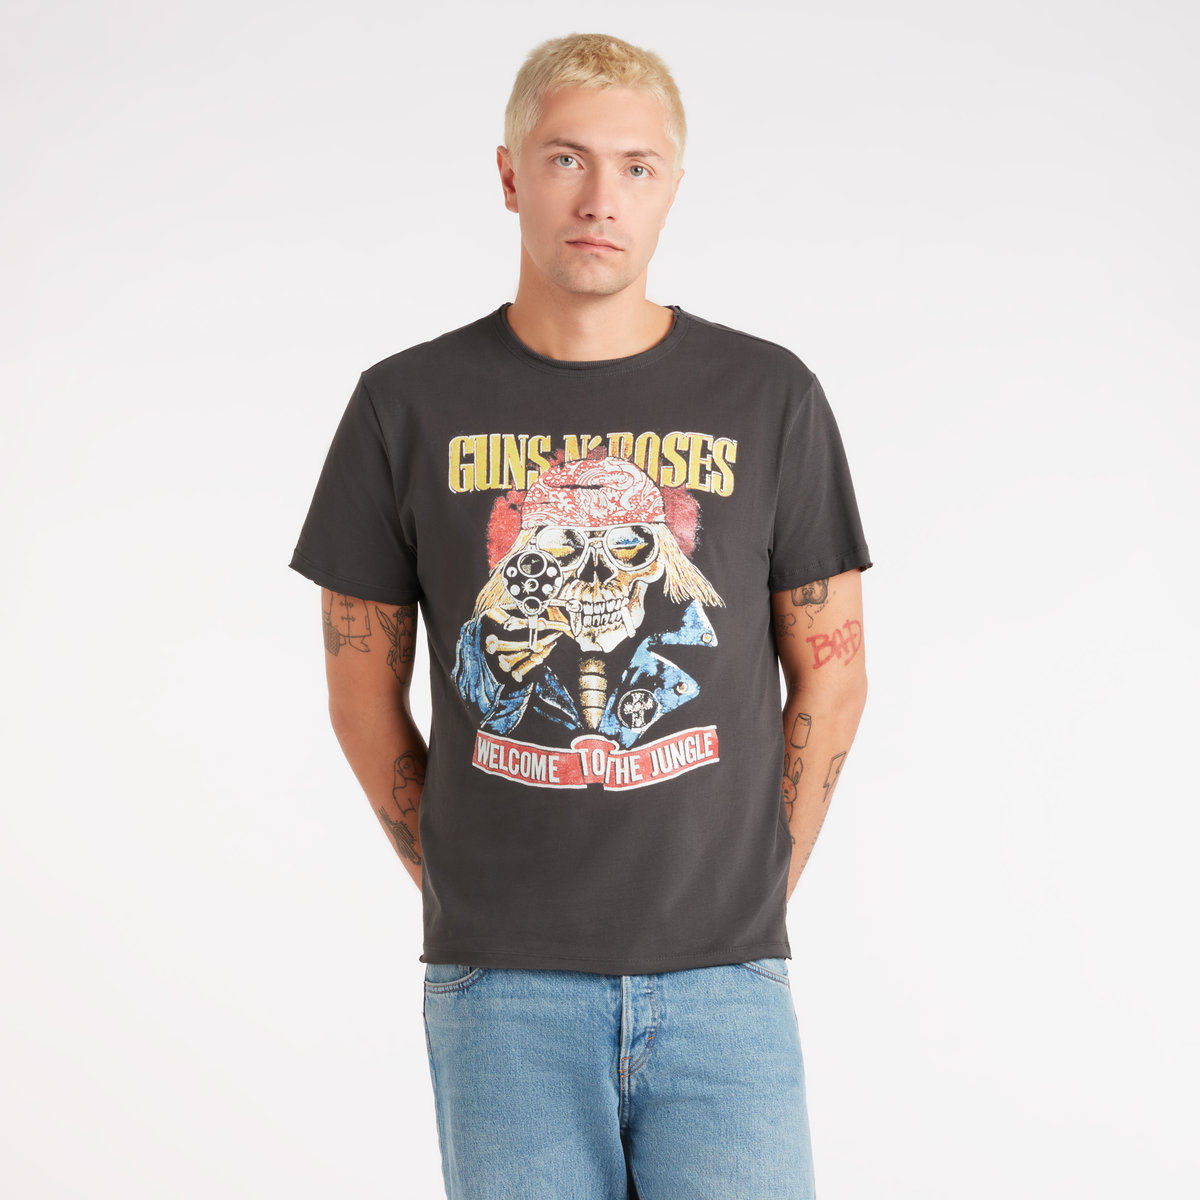 Guns N Roses - Welcome | Guns n Roses Graphic T-Shirts | Amplified